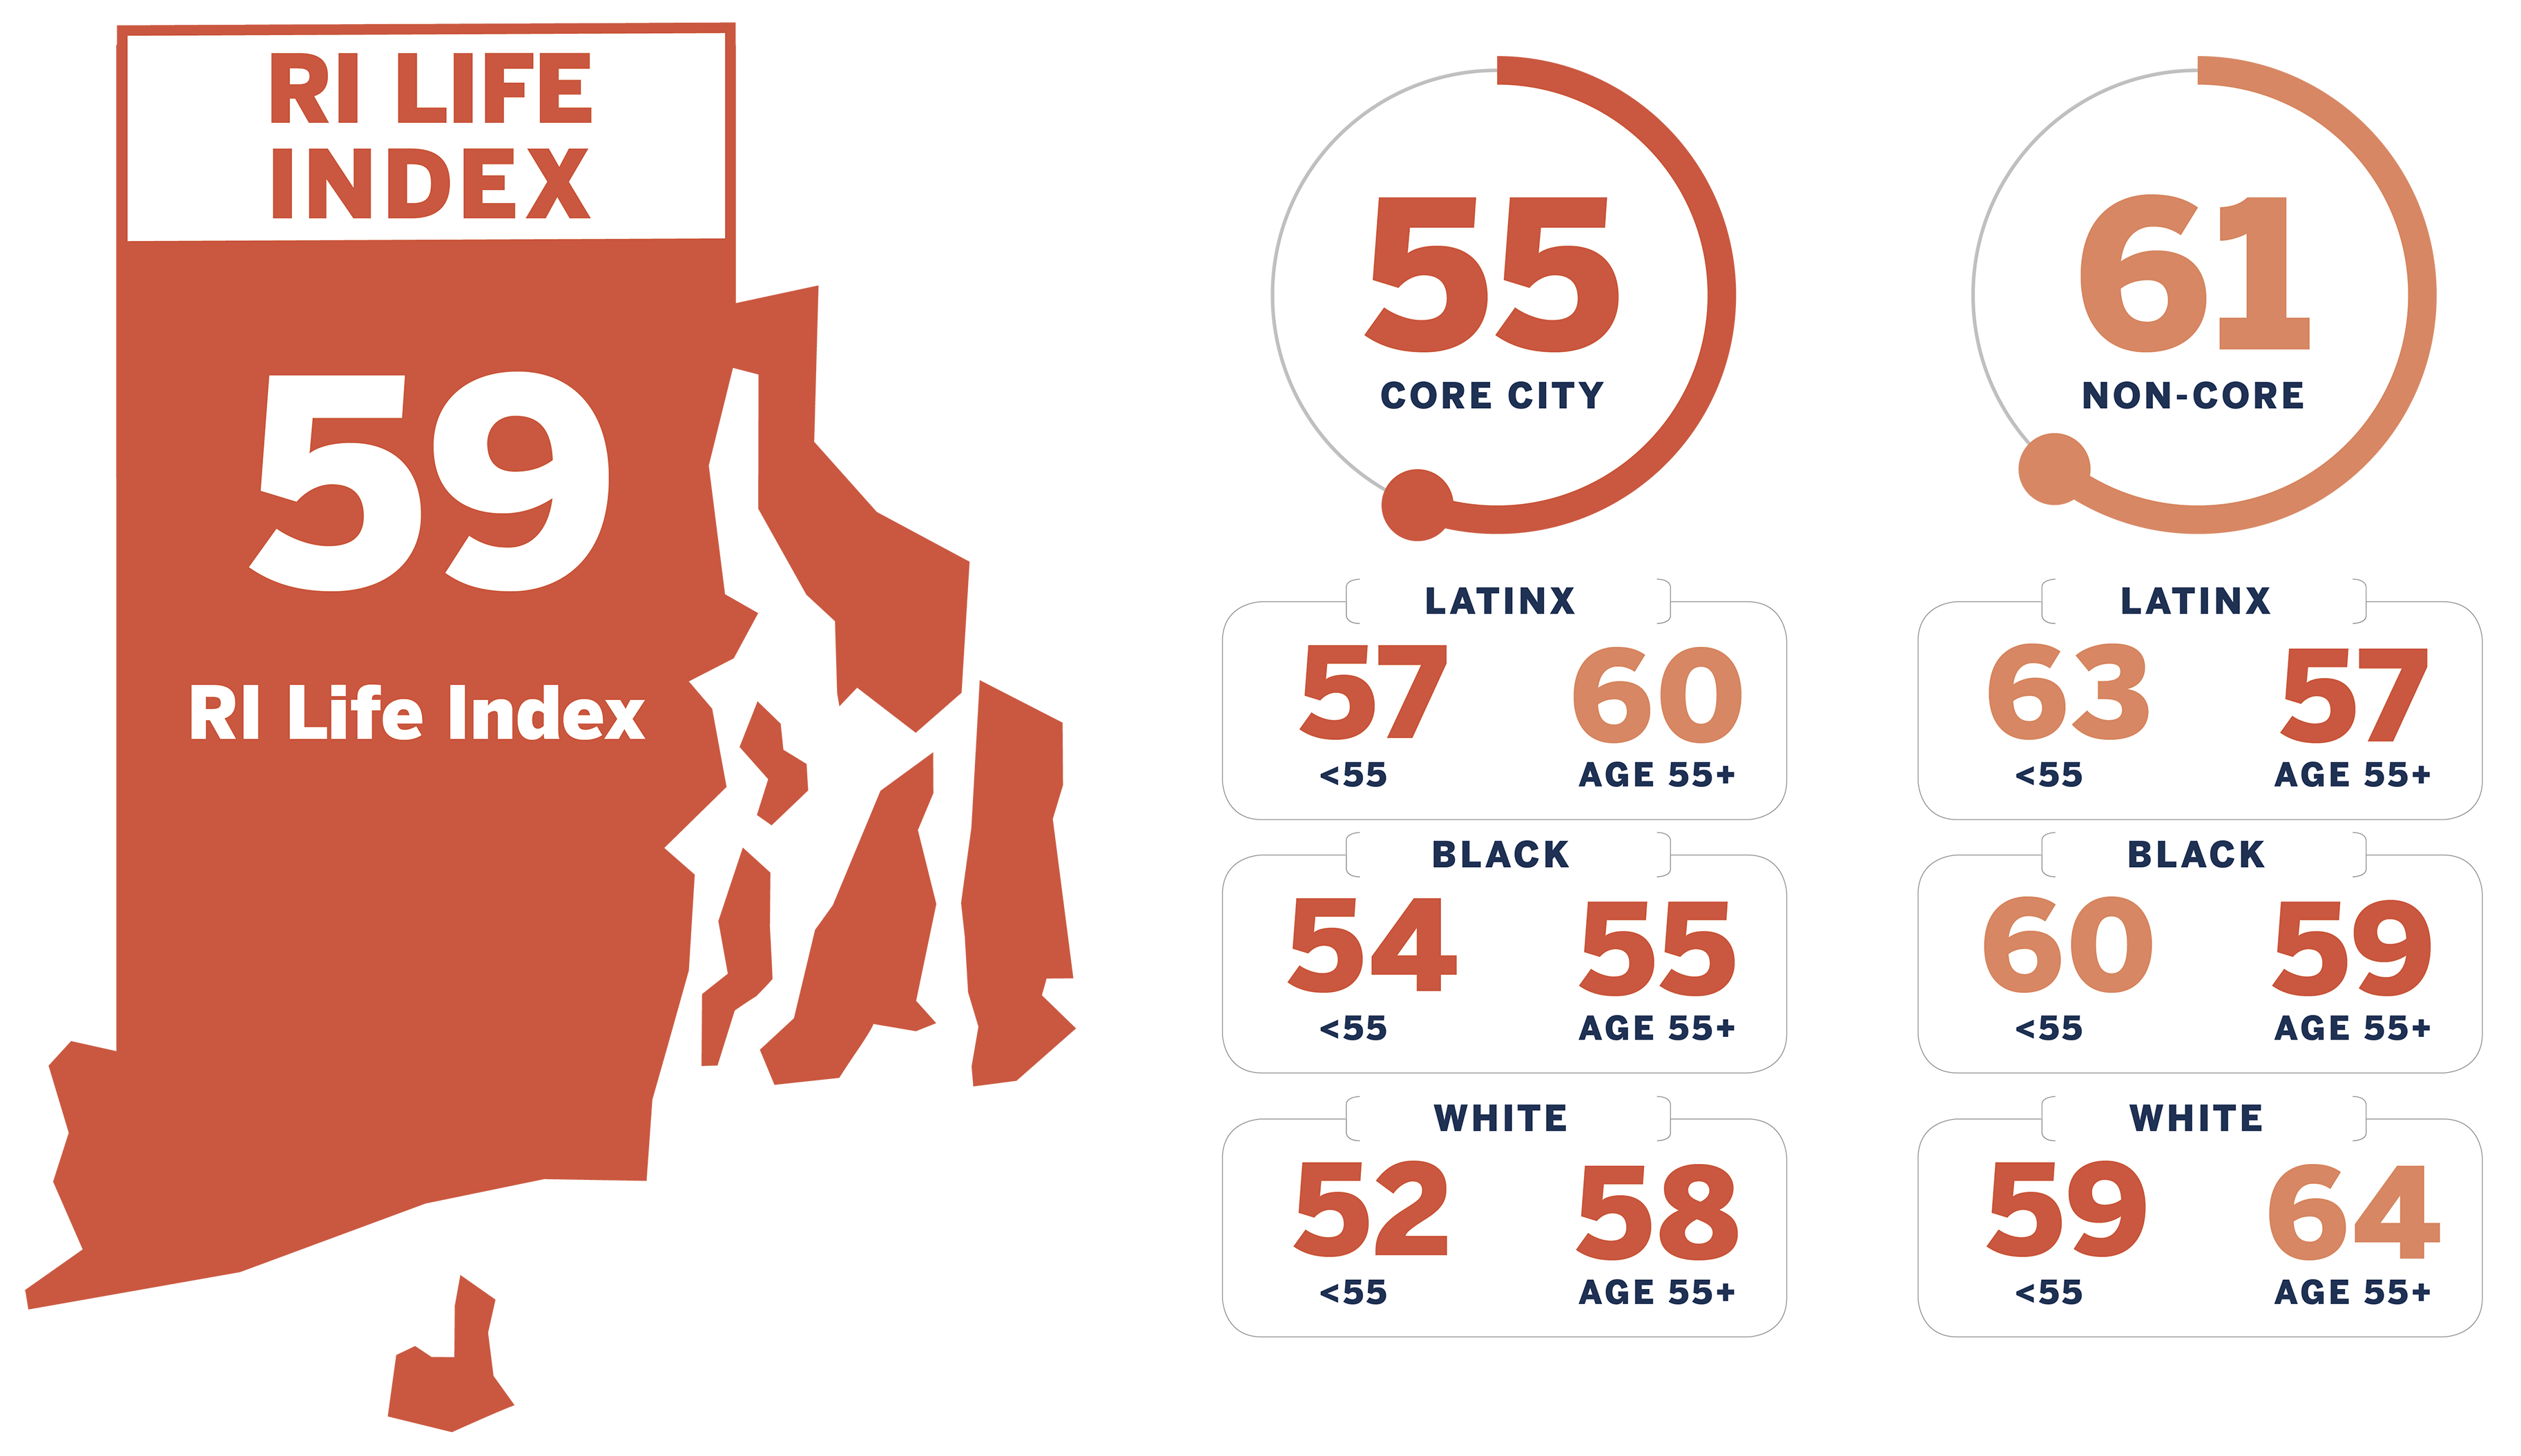 RI Life Index: 59; Chart breakdown: Core City: 55 (broken down by Latinx, Black, and White ages less than and over 55) Non-Core: 61 (broken down by Latinx, Black, and White ages less than and over 55)